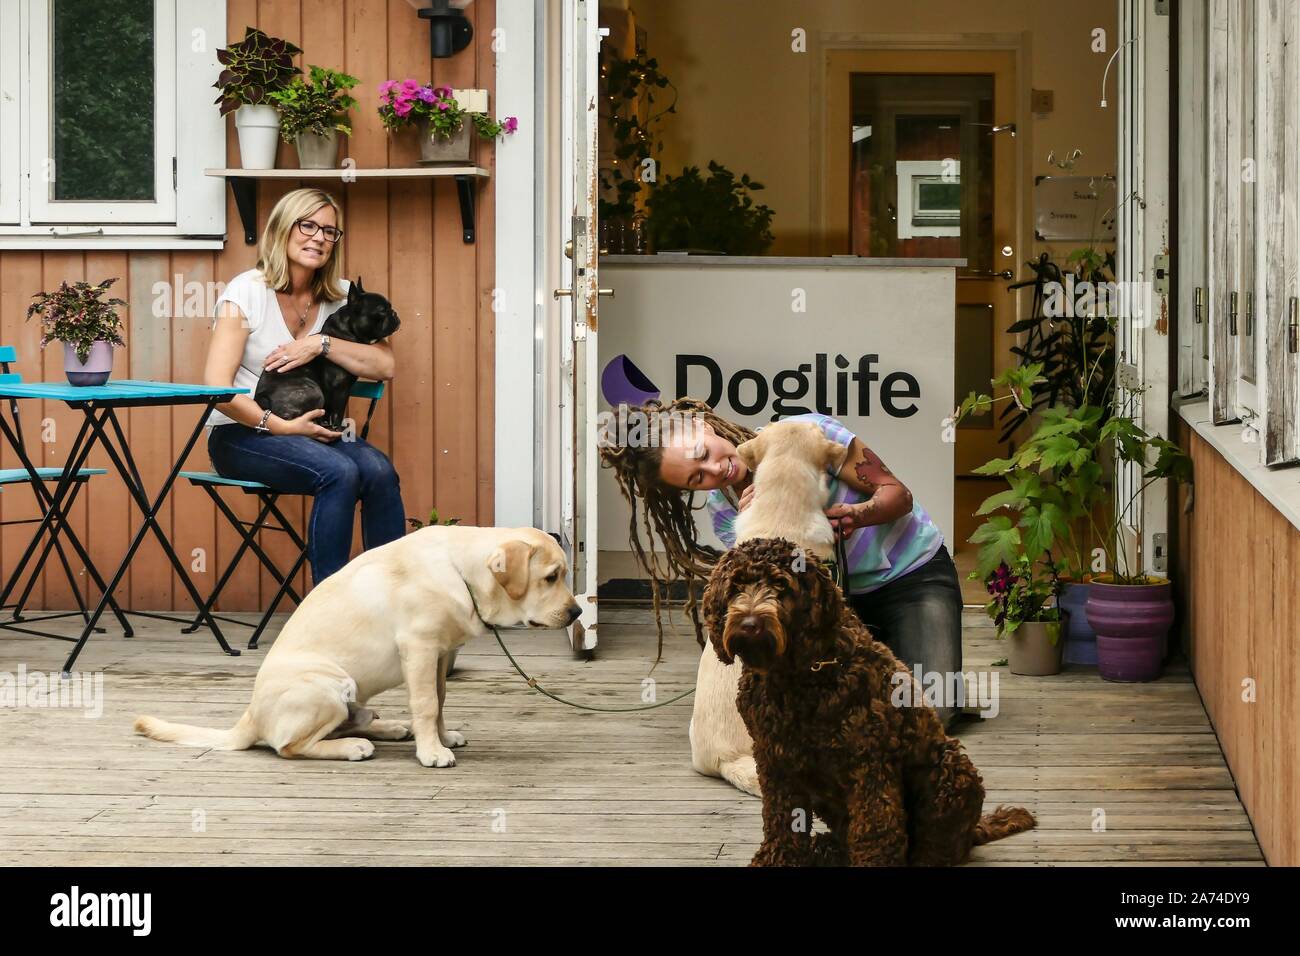 Stockholm, Sweden A daycare center for dogs and their trainers or keepers, | usage worldwide Stock Photo